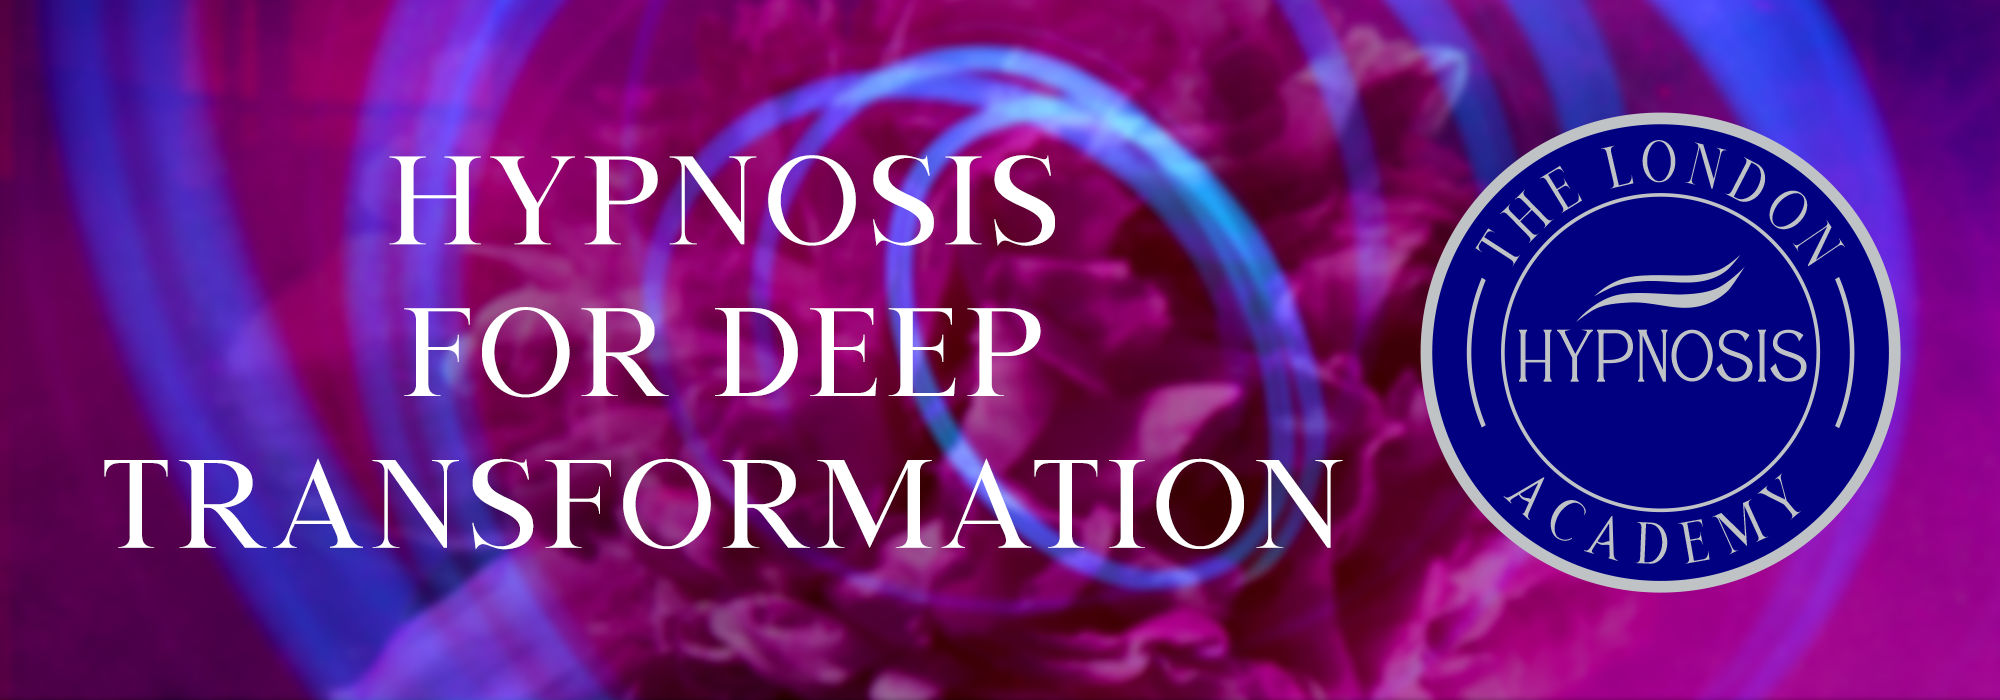 Hypnosis for Deep Transformation